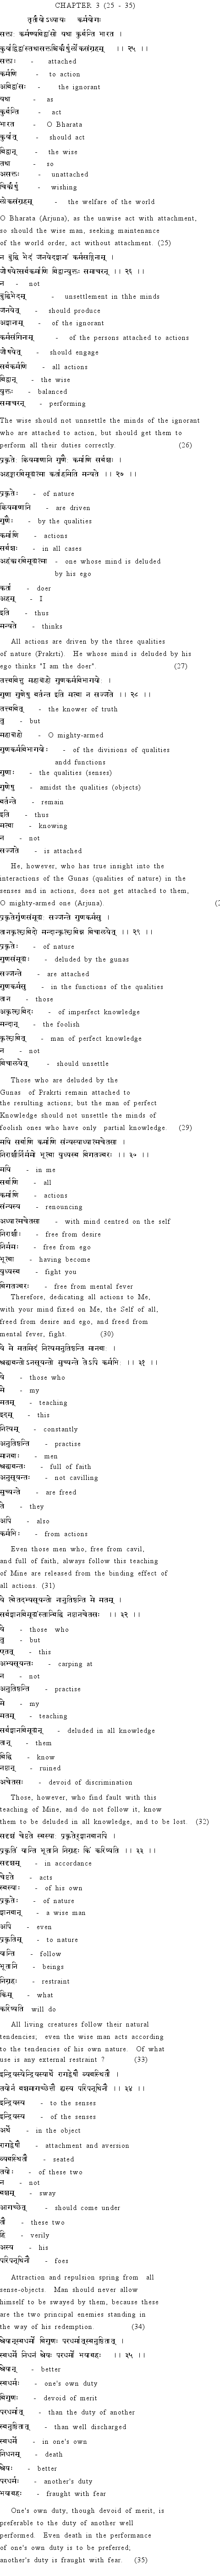 Text of Ch.3_4